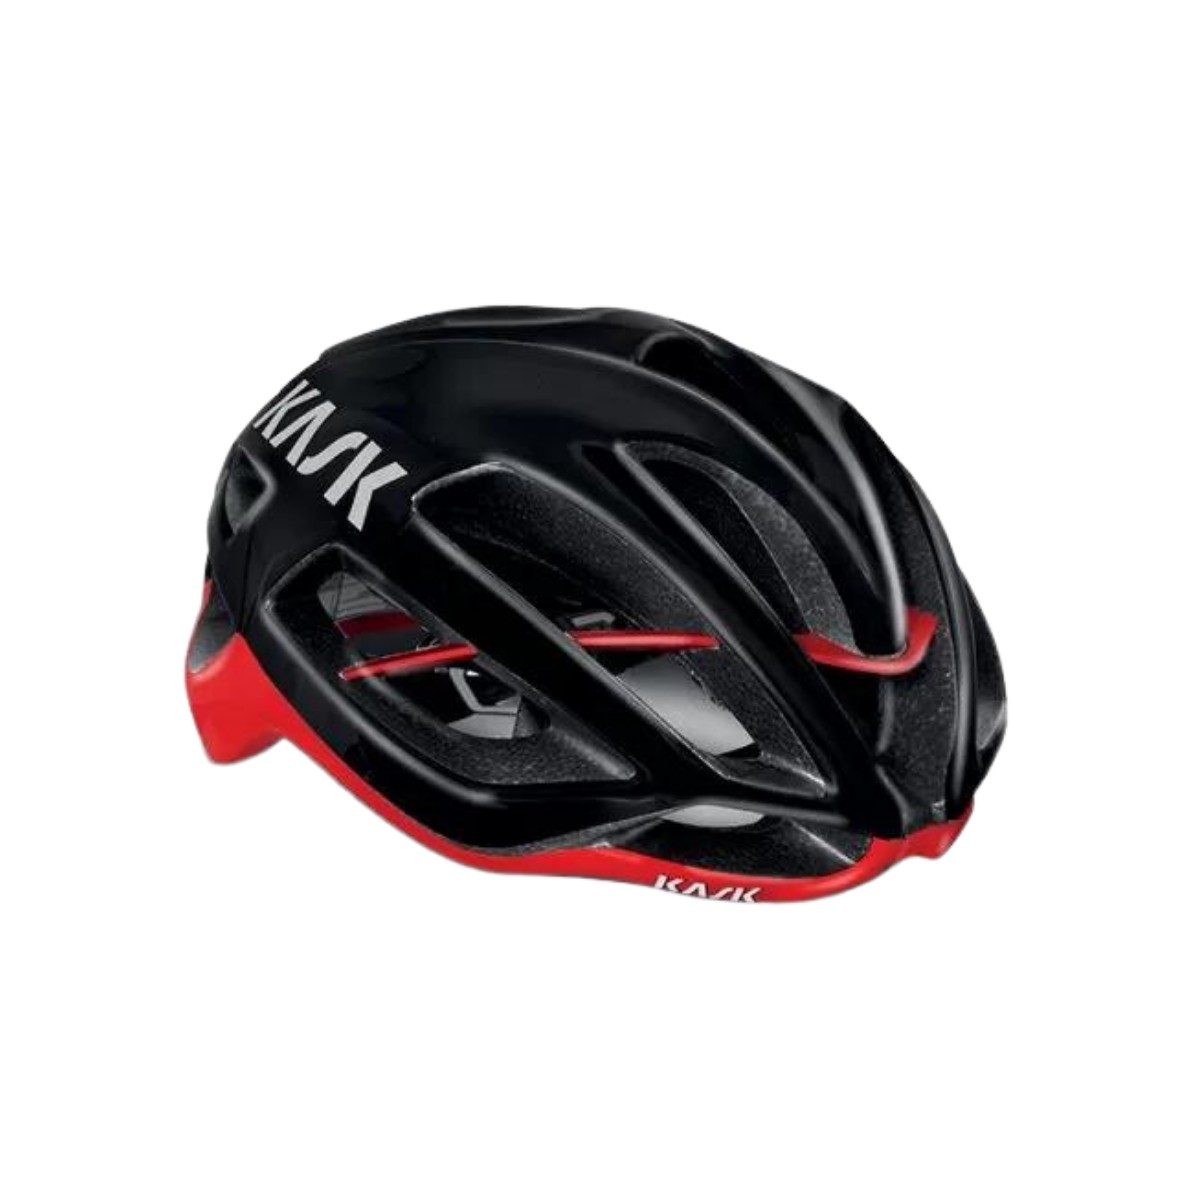 Helmet Kask Protone Black Red, Size S product